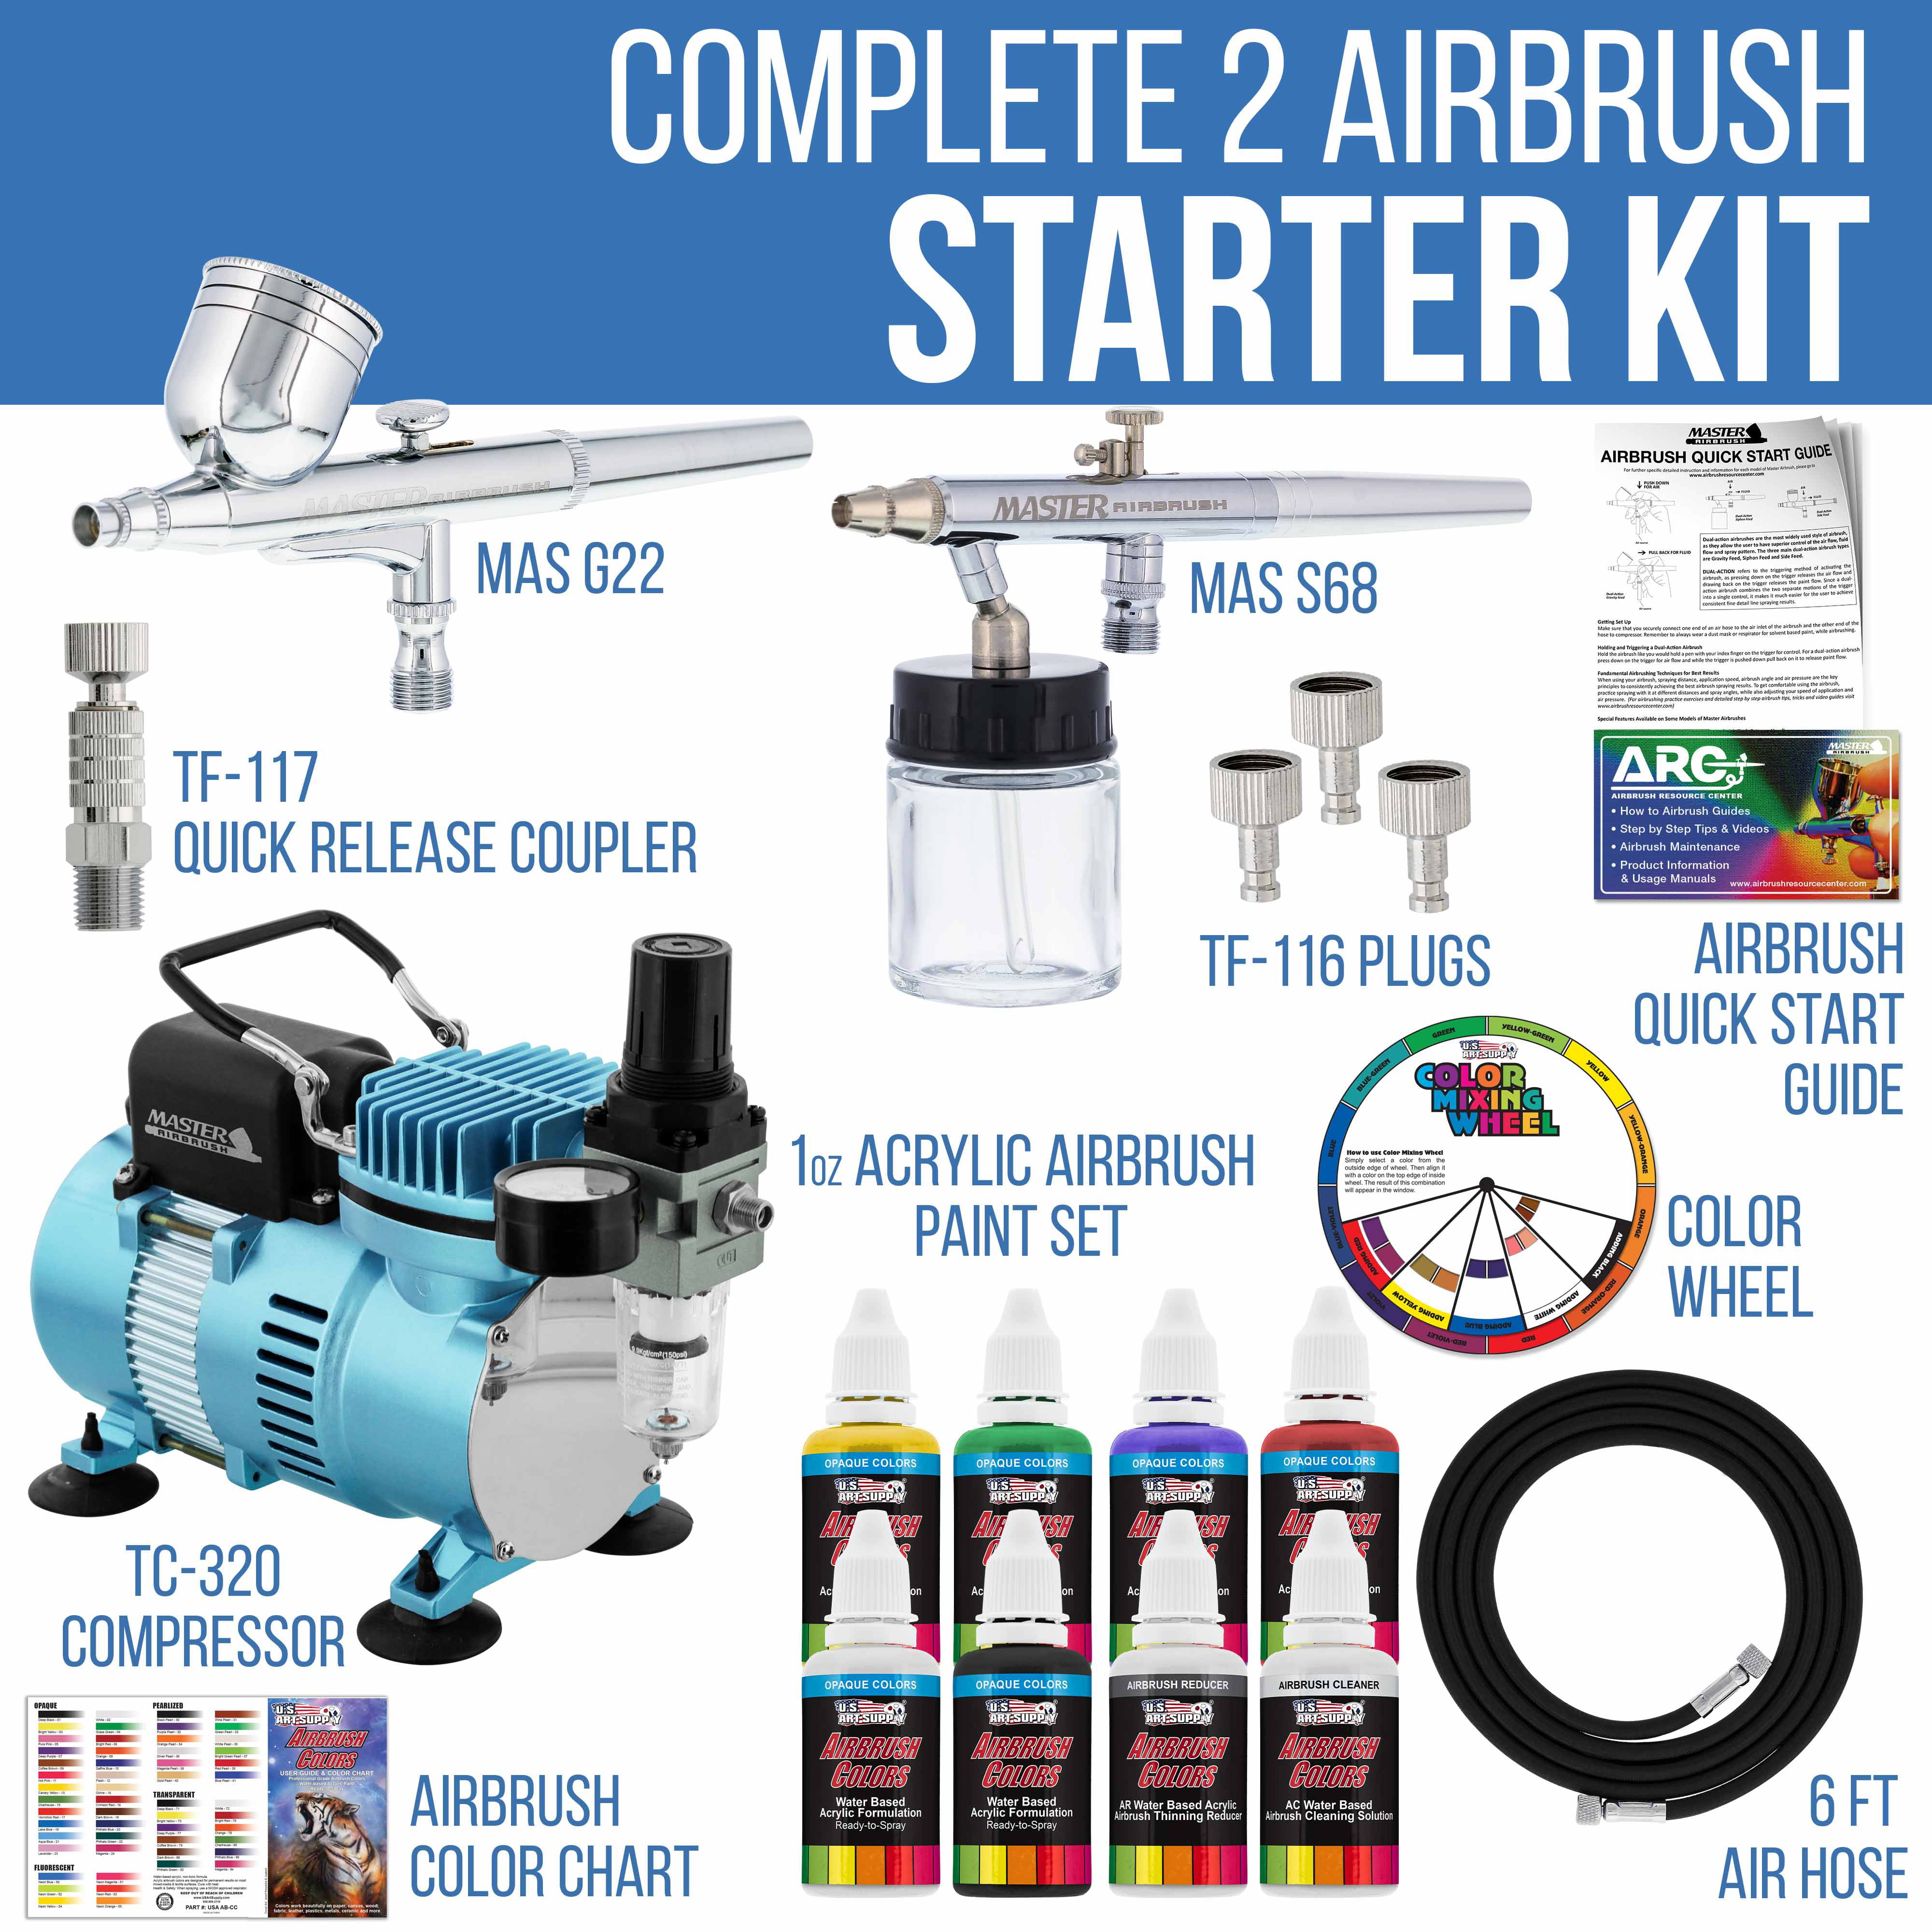 Master Airbrush Dual Fan Air Compressor Kit with 2 Professional 